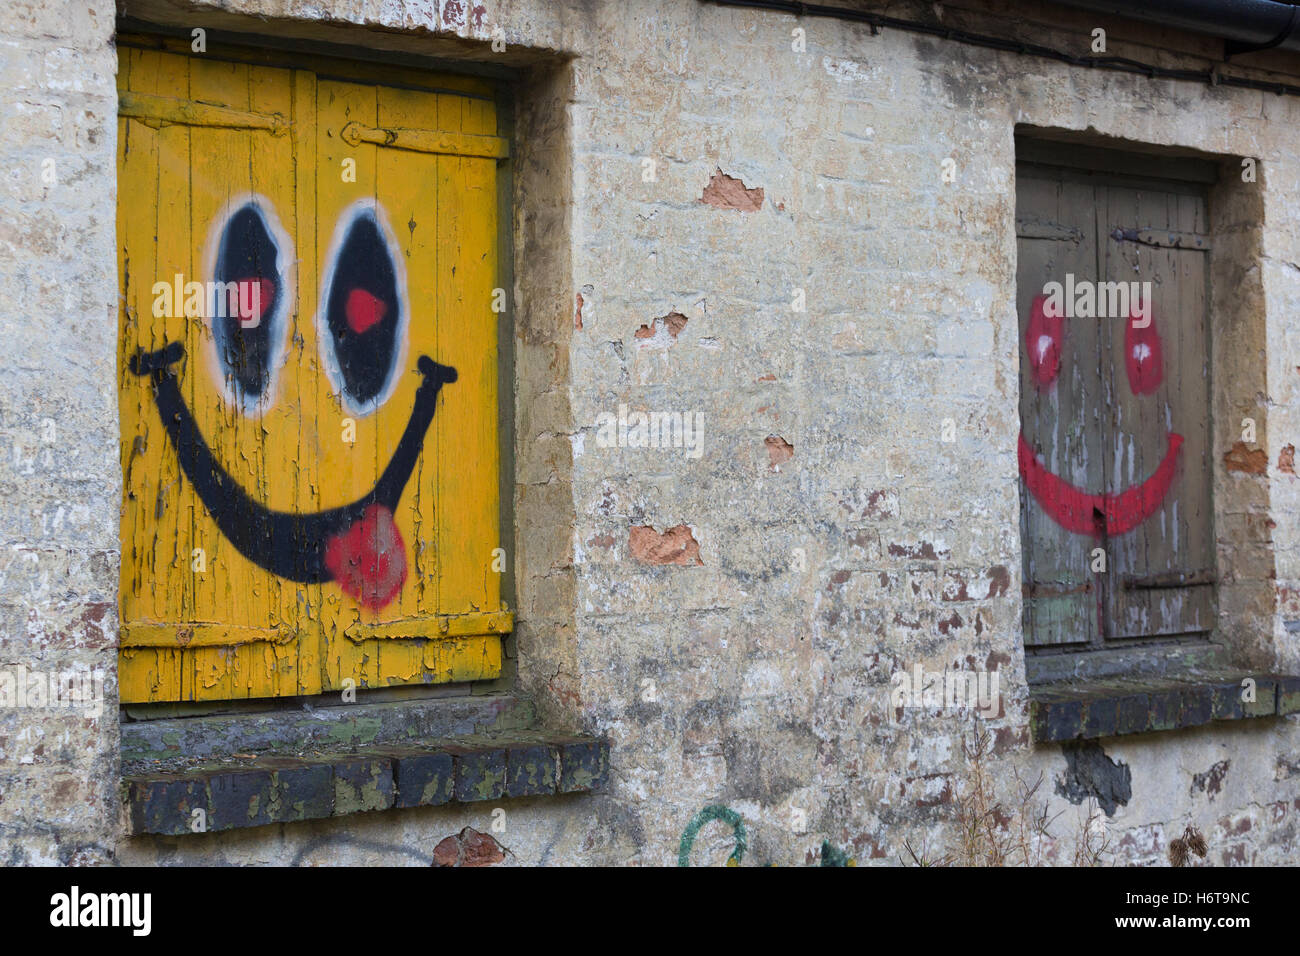 Smiling, happy faces painted onto the side of a derelict building Stock Photo